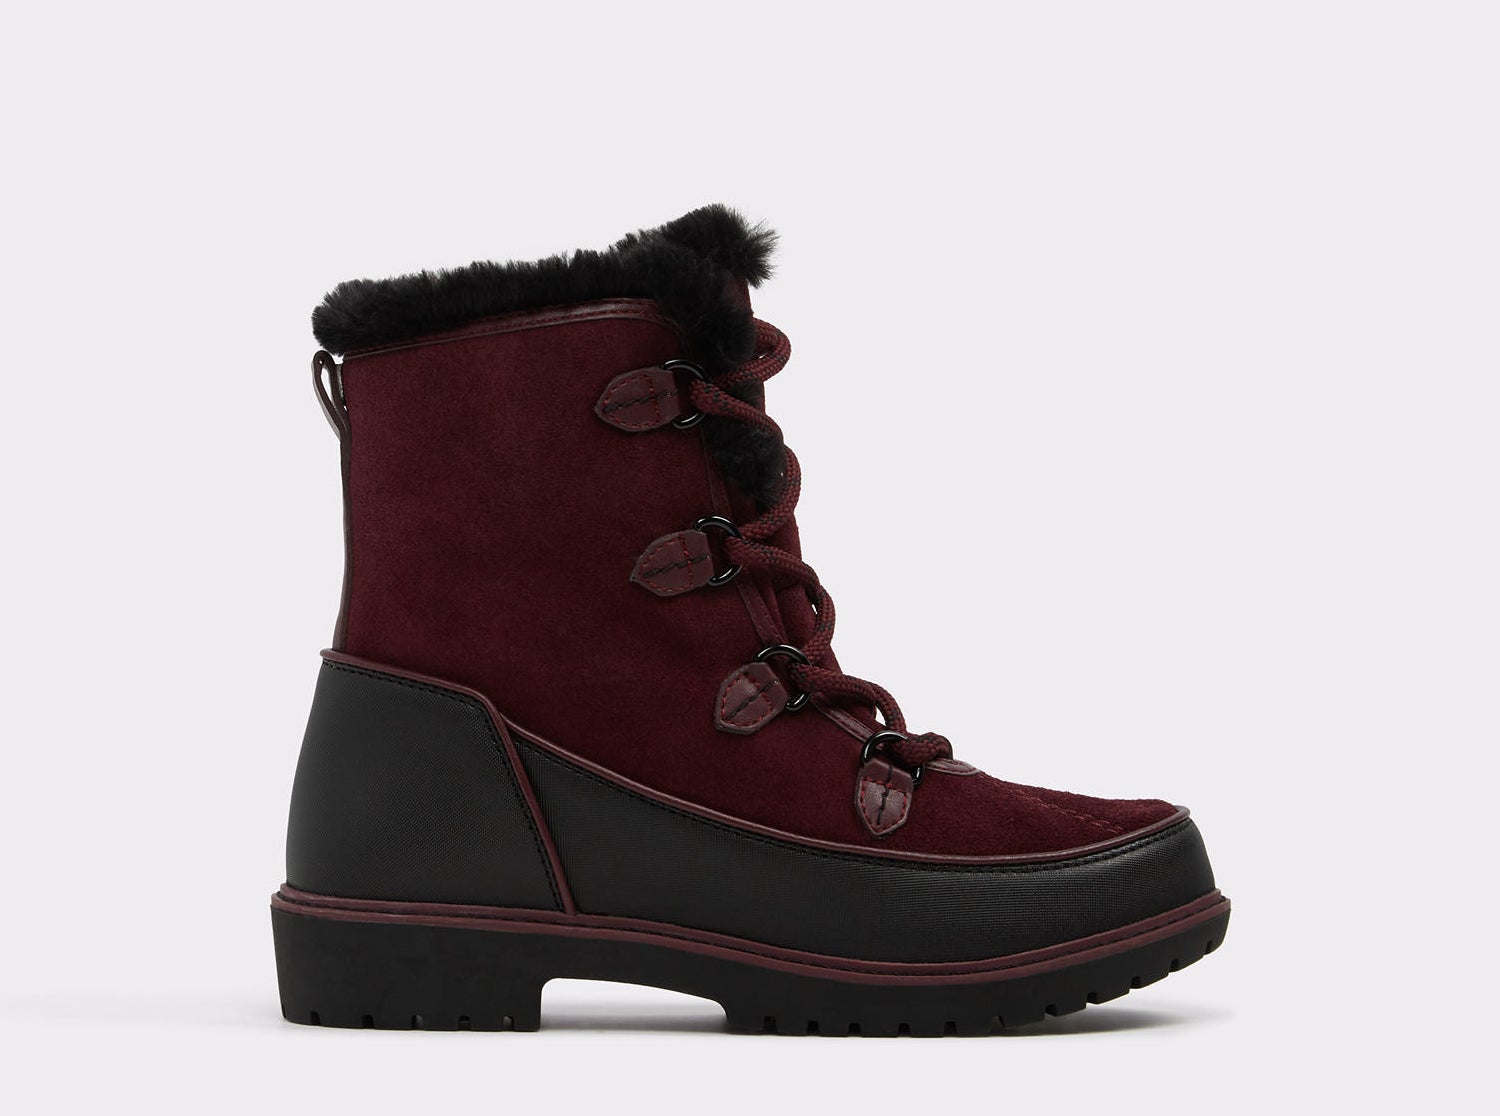 34 Winter Boots That'll Actually Keep Your Feet Warm